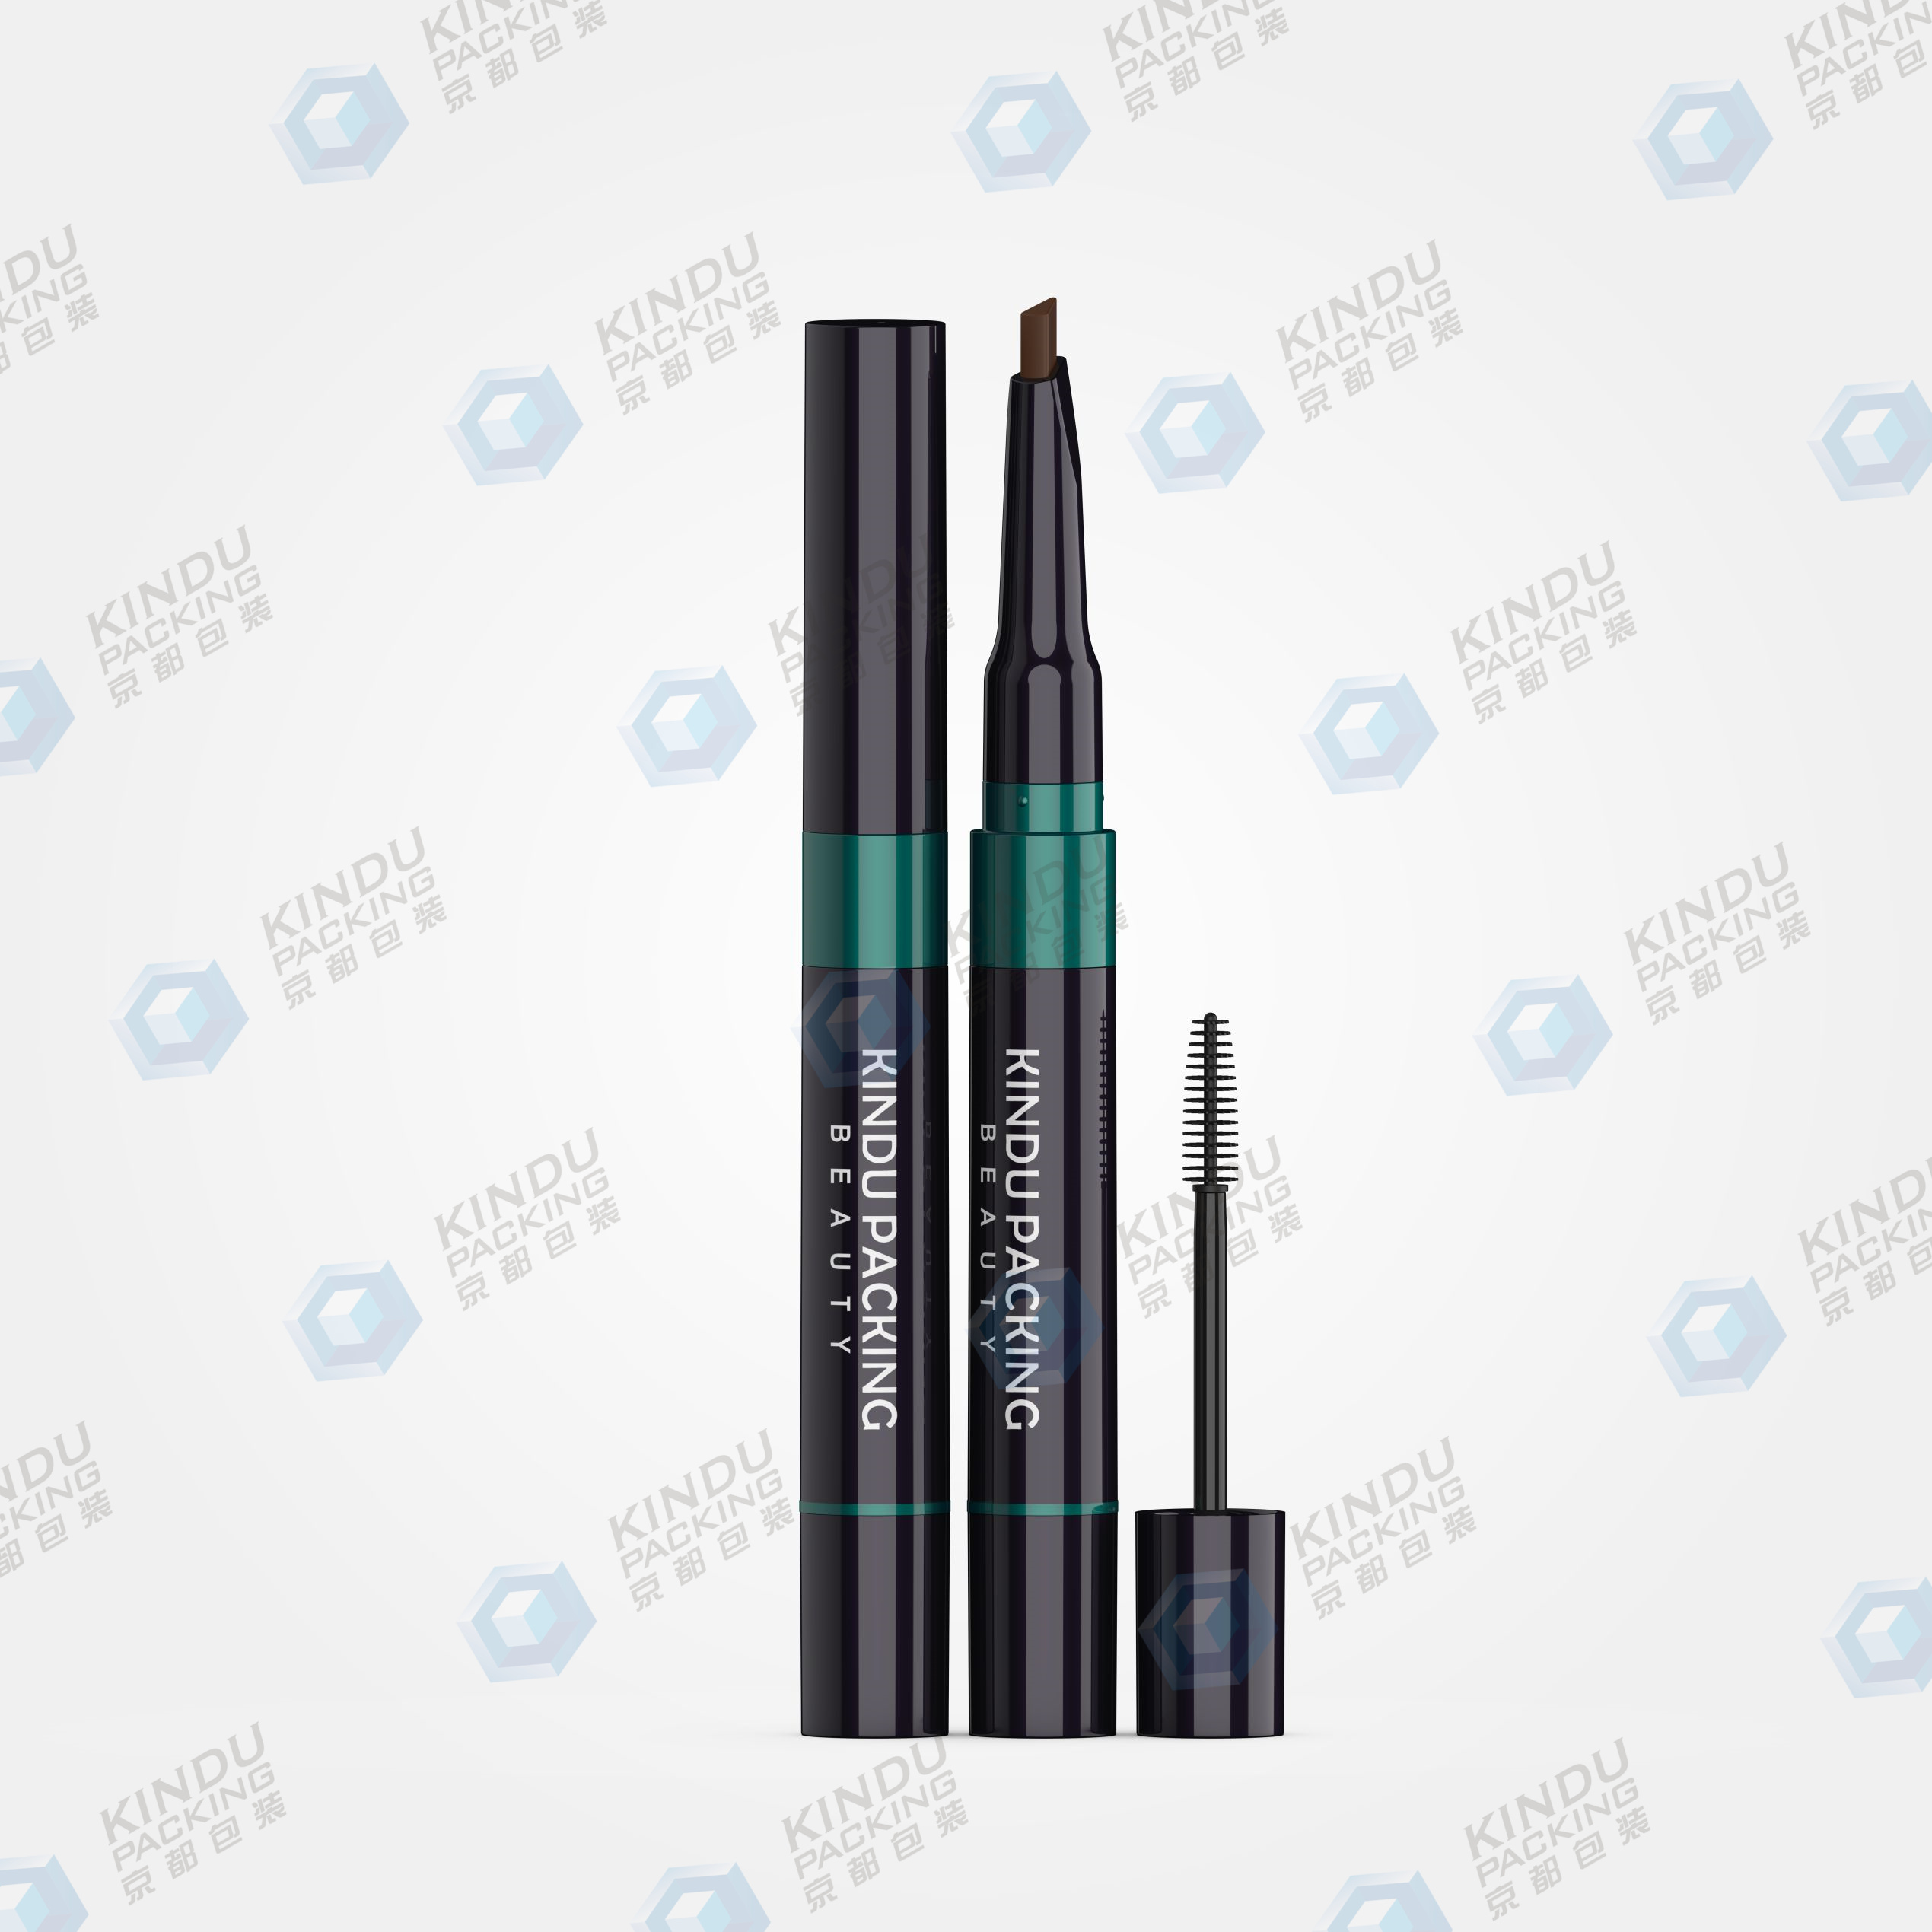 Duo mascara pack for eyebrows and mascara (ZH-A0012)